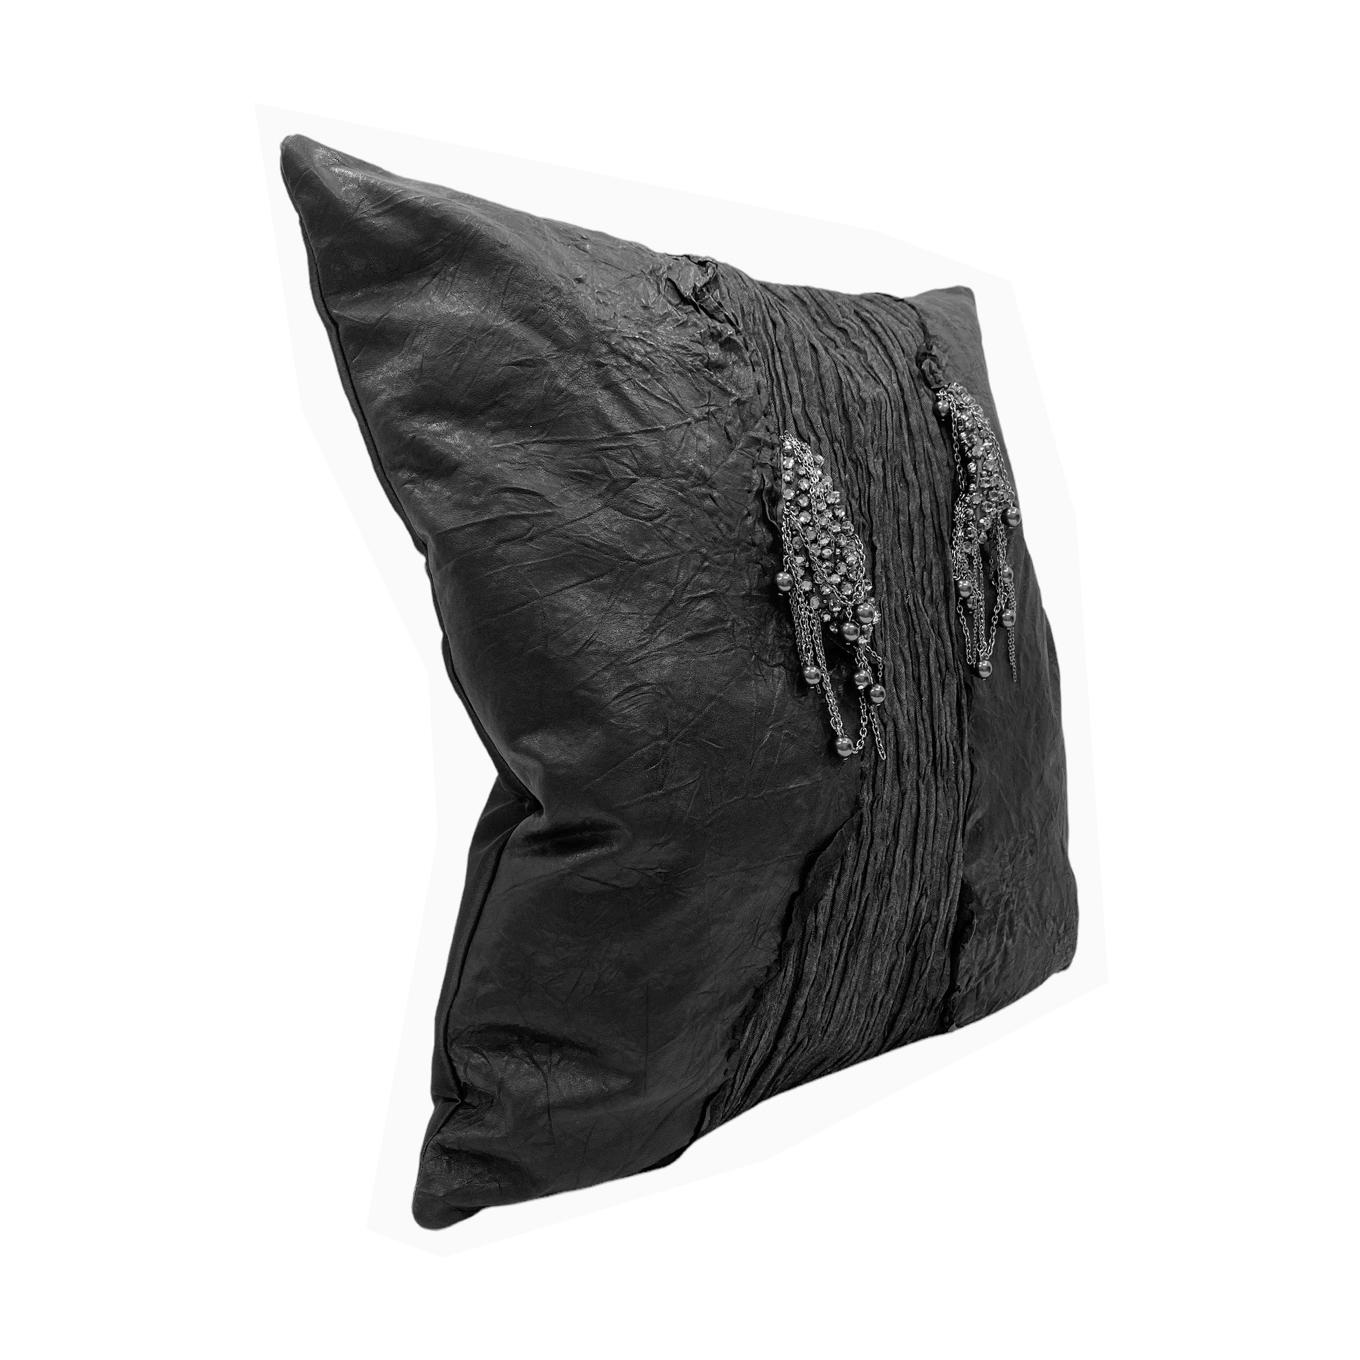 Authentic Italian wrinkled black leather pillow with hand-sewn crystals and sixteen real black 
pearls. This gives a perfect softness and sheen to the pillows, complementing any interior decorations These pillows were dreamt up by our in-house